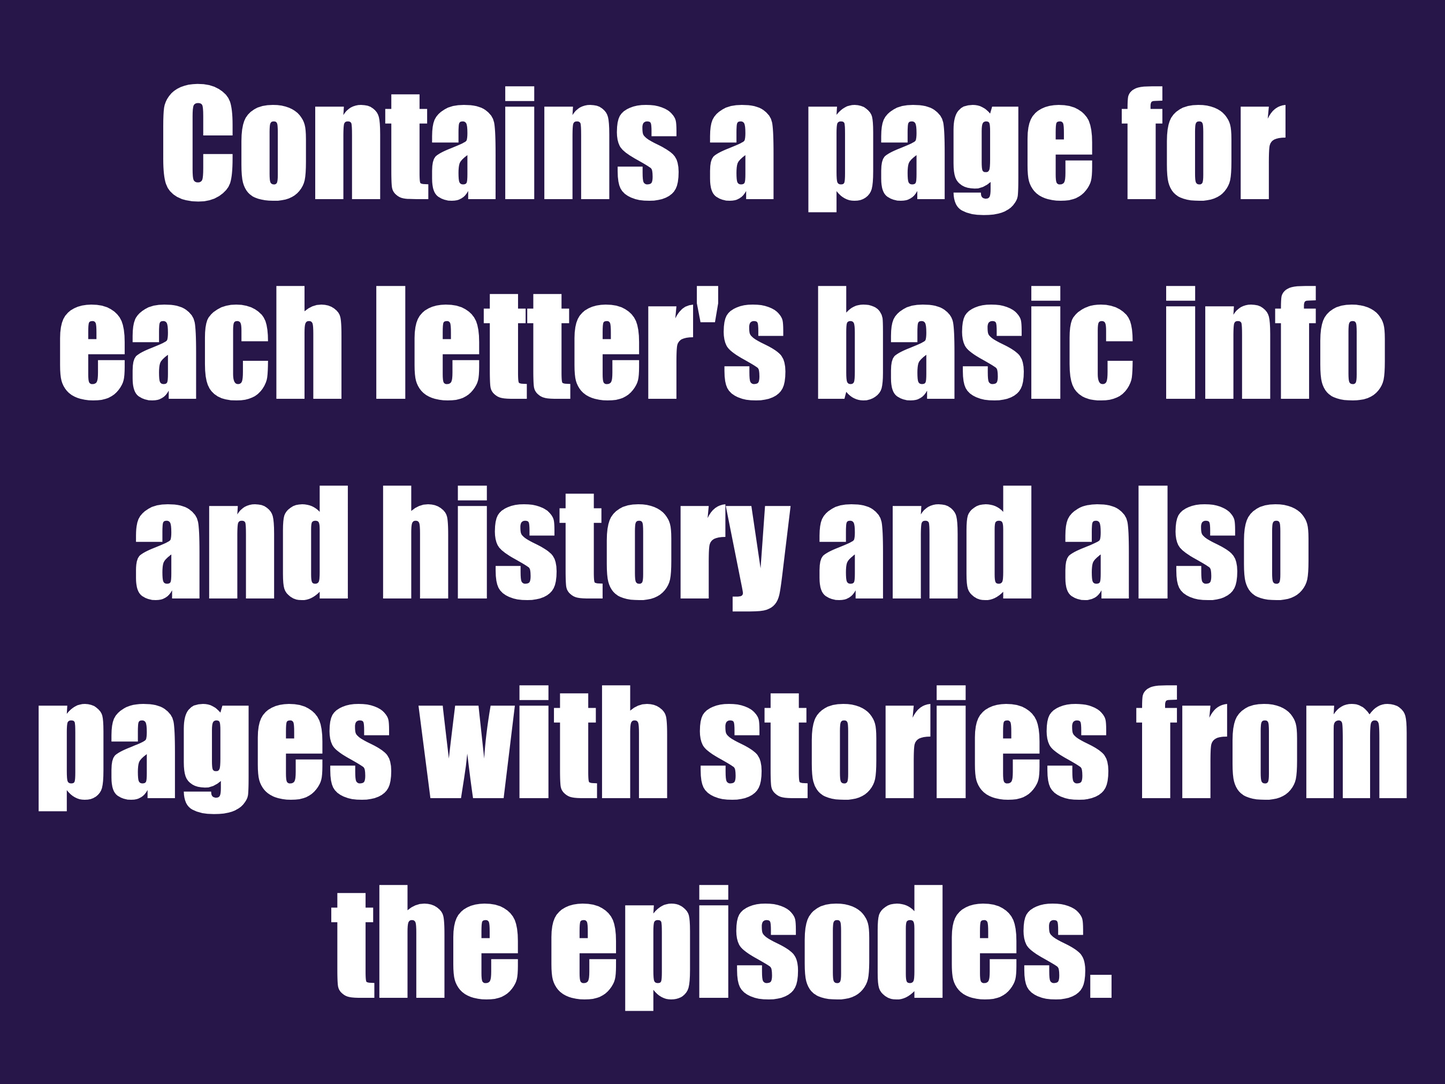 Contains a page for each letter and stories from the episodes